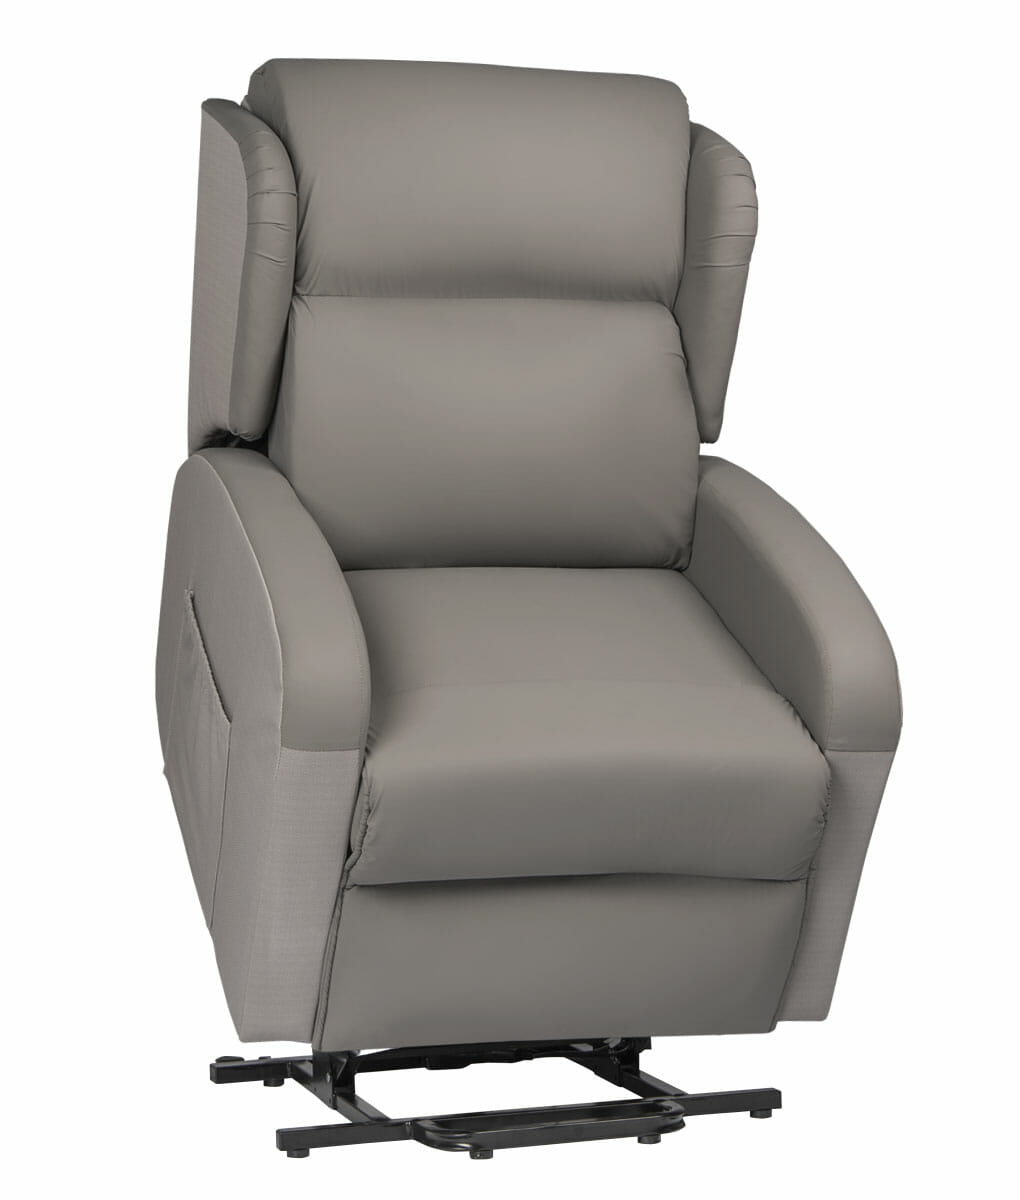 Twin Motor Royale Air Pressure Relieving Lift Chair (Adjustable Air Bladder System)